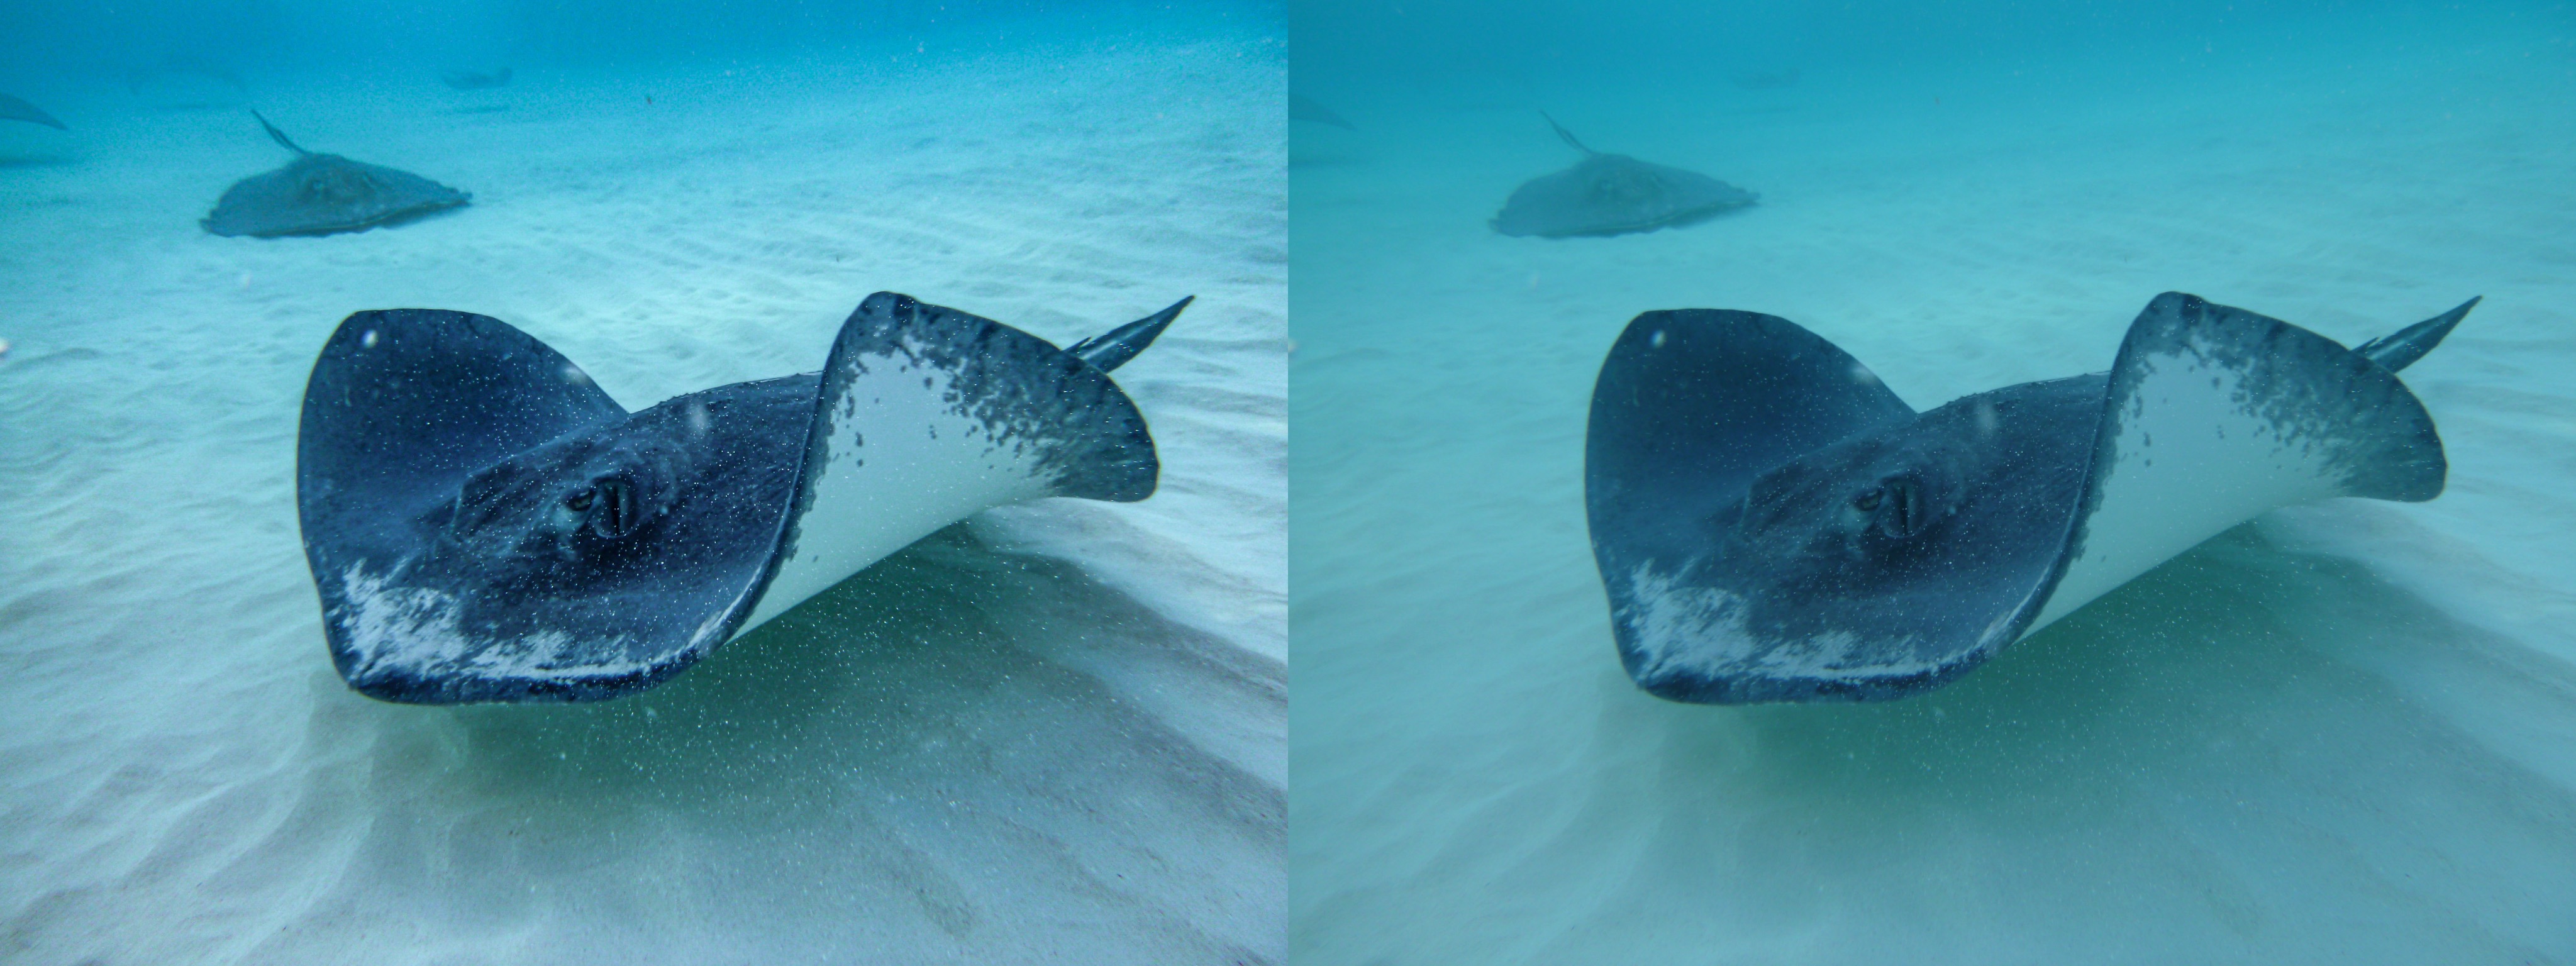 Underwater photo of a stingray in the foreground with its wings bent upward kicking up sand from the shallow water. Side-by-side of the unedited photo.